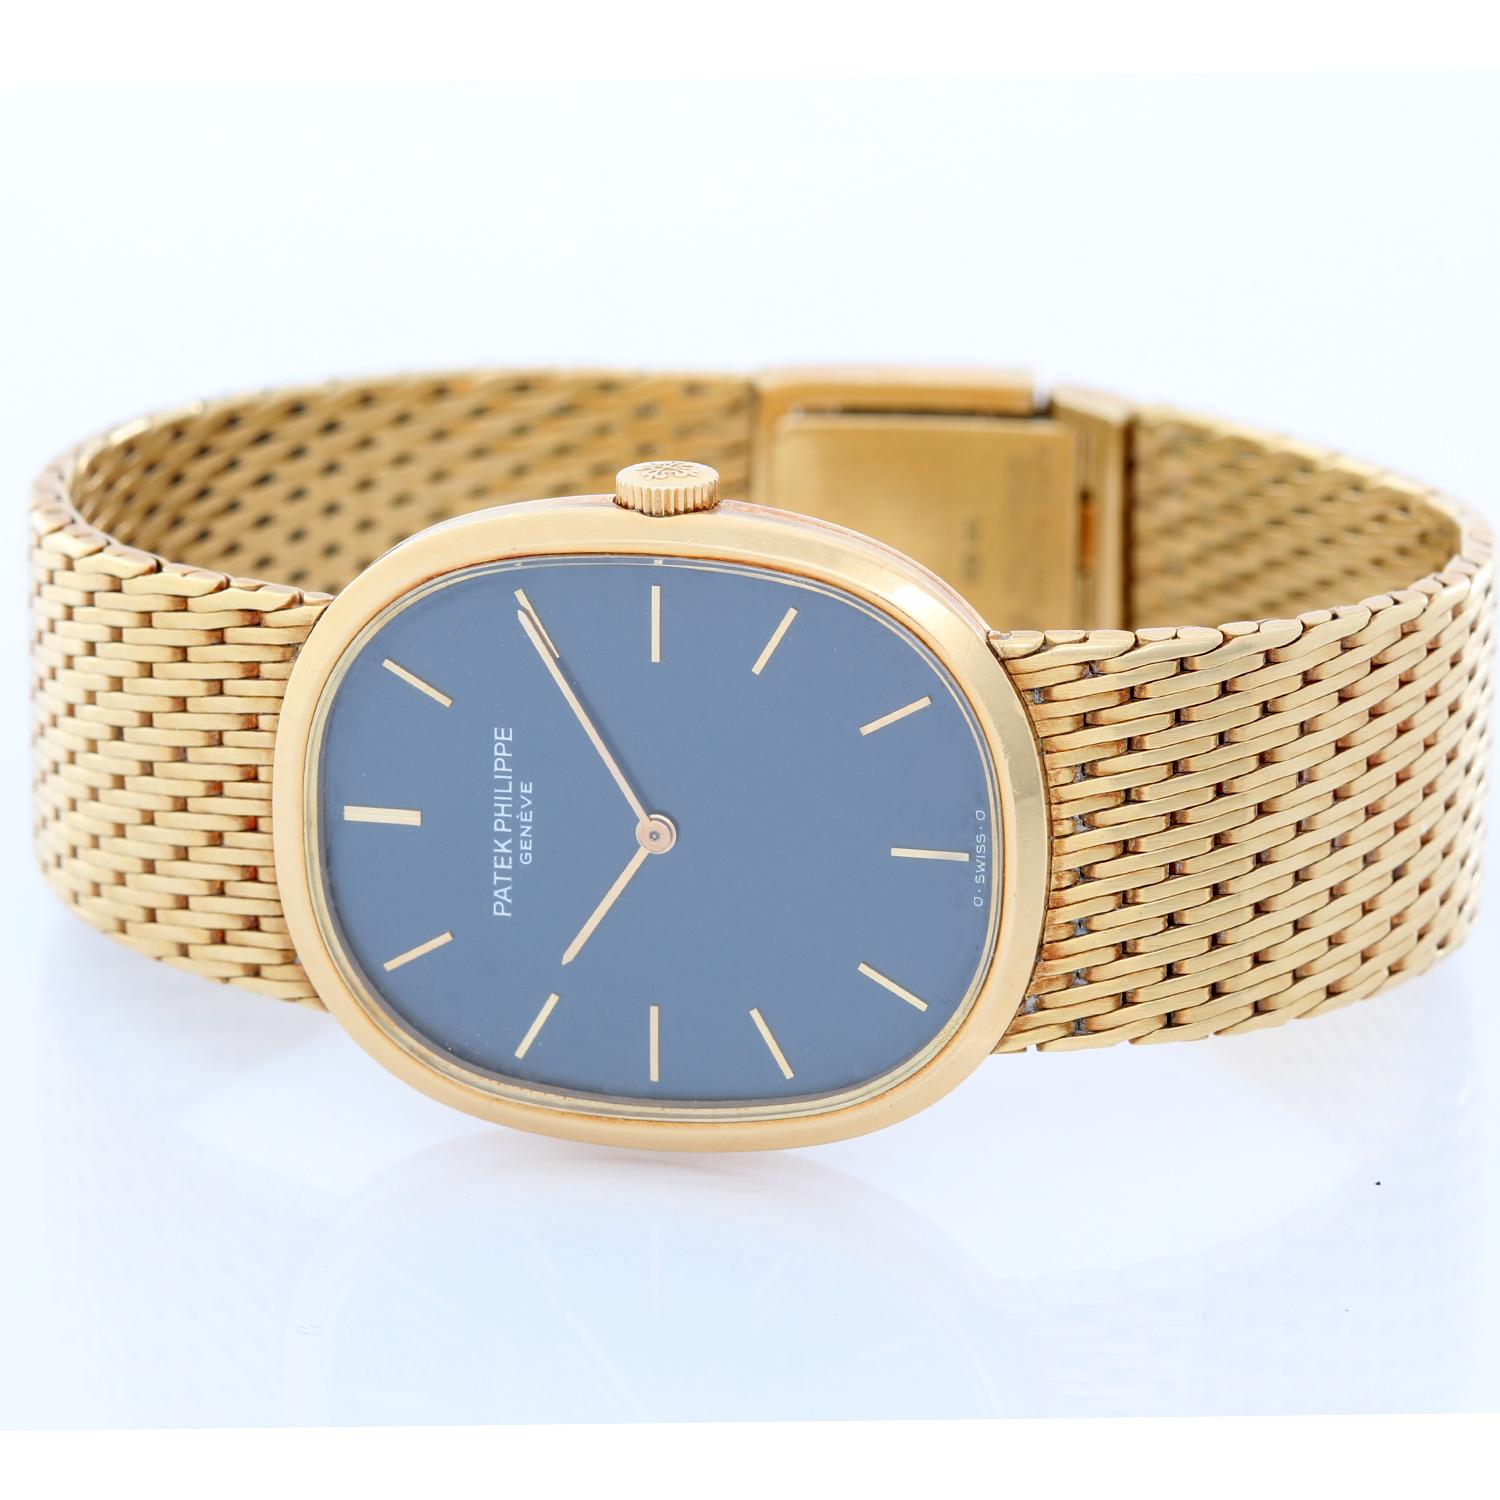 Patek Philippe 18k Yellow Gold  Ellipse Men's Watch Ref. 3848 -  Manual winding. 18k yellow gold case  (27mm x 32mm). Blue dial with gold stick markers. Yellow gold bracelet. Pre-owned with Patek Philippe box.This will fit a 6 3/4 inch wrist